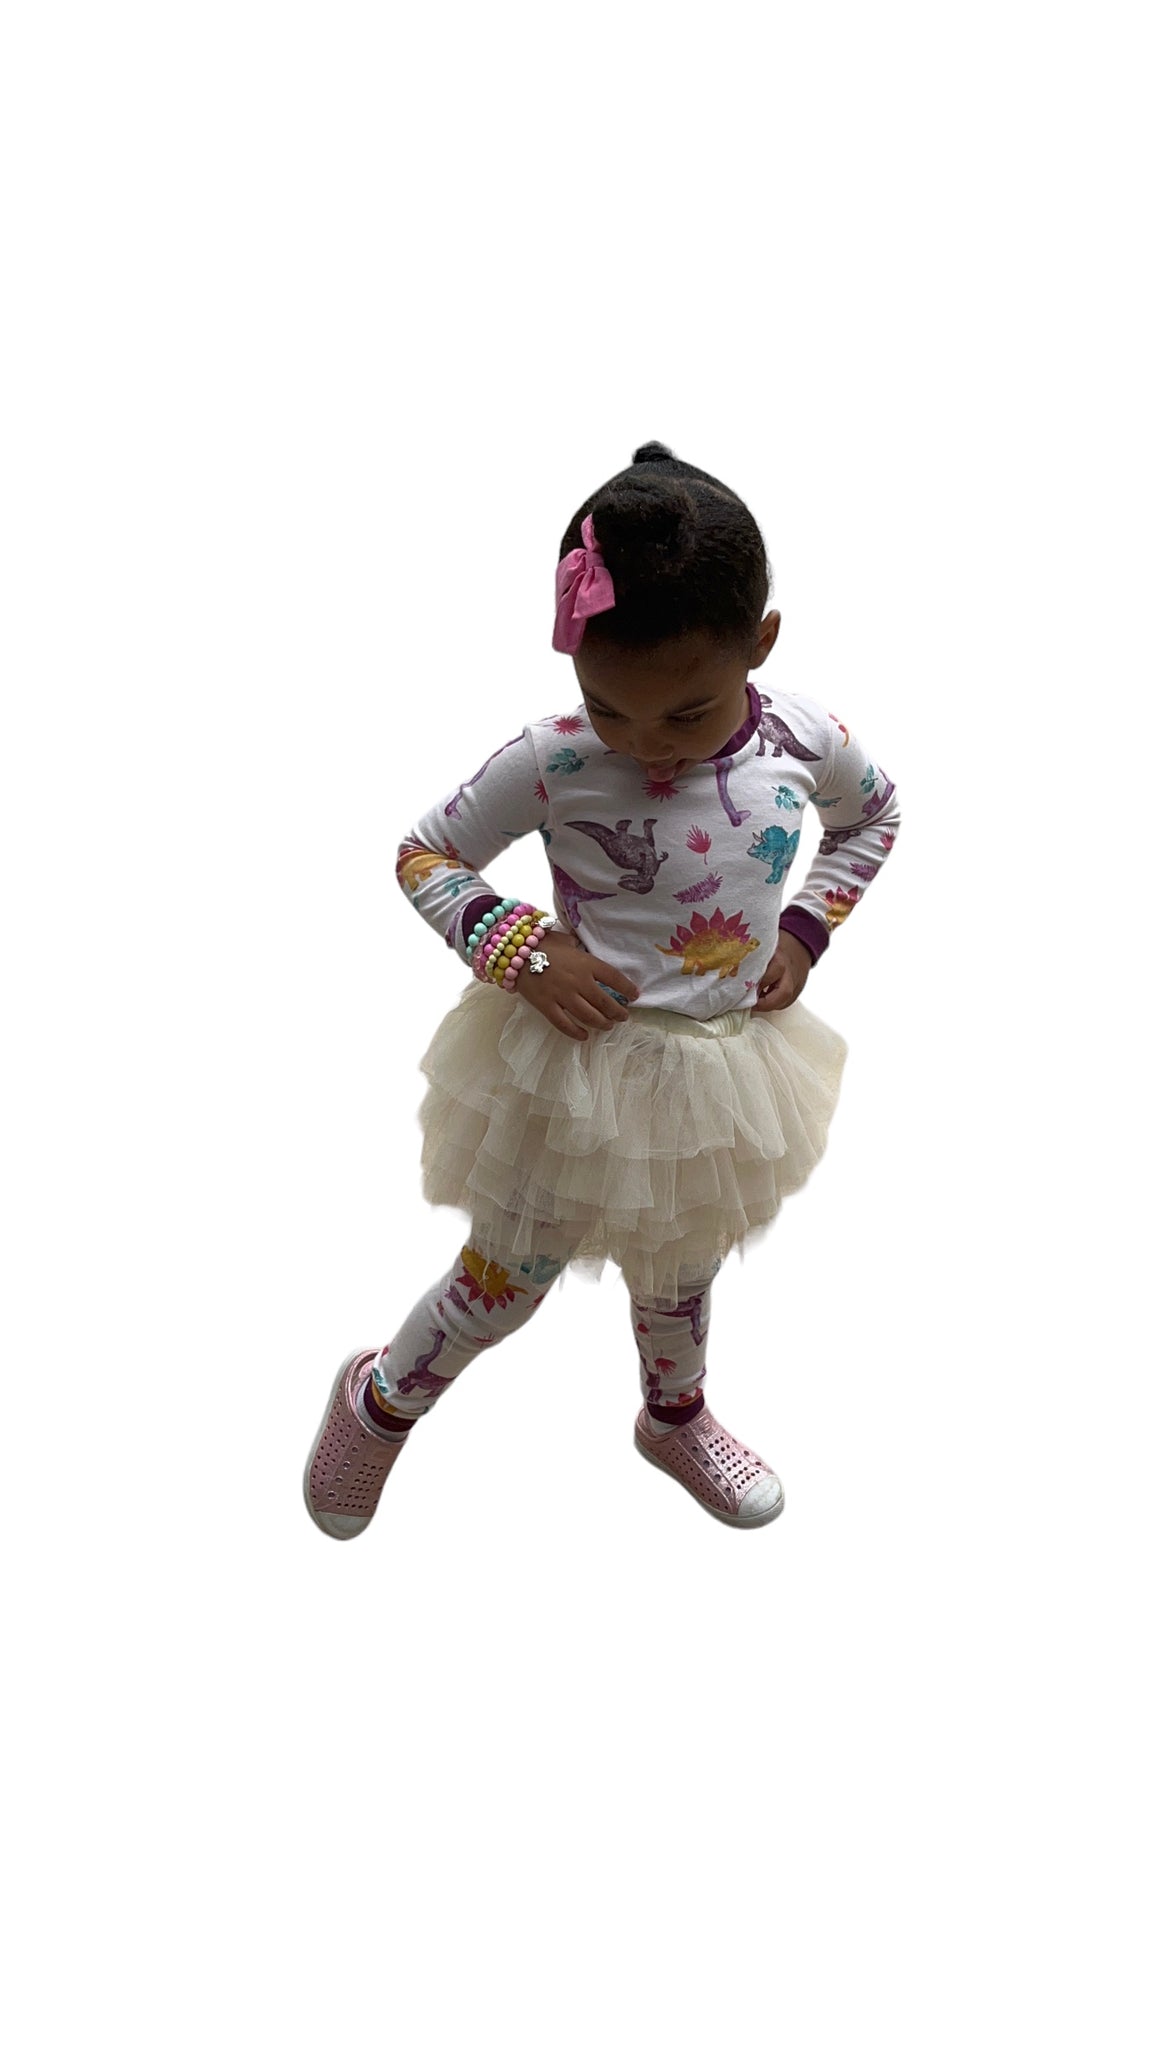 Cultivating Toddlers' Imagination Through Self-Dress and Style